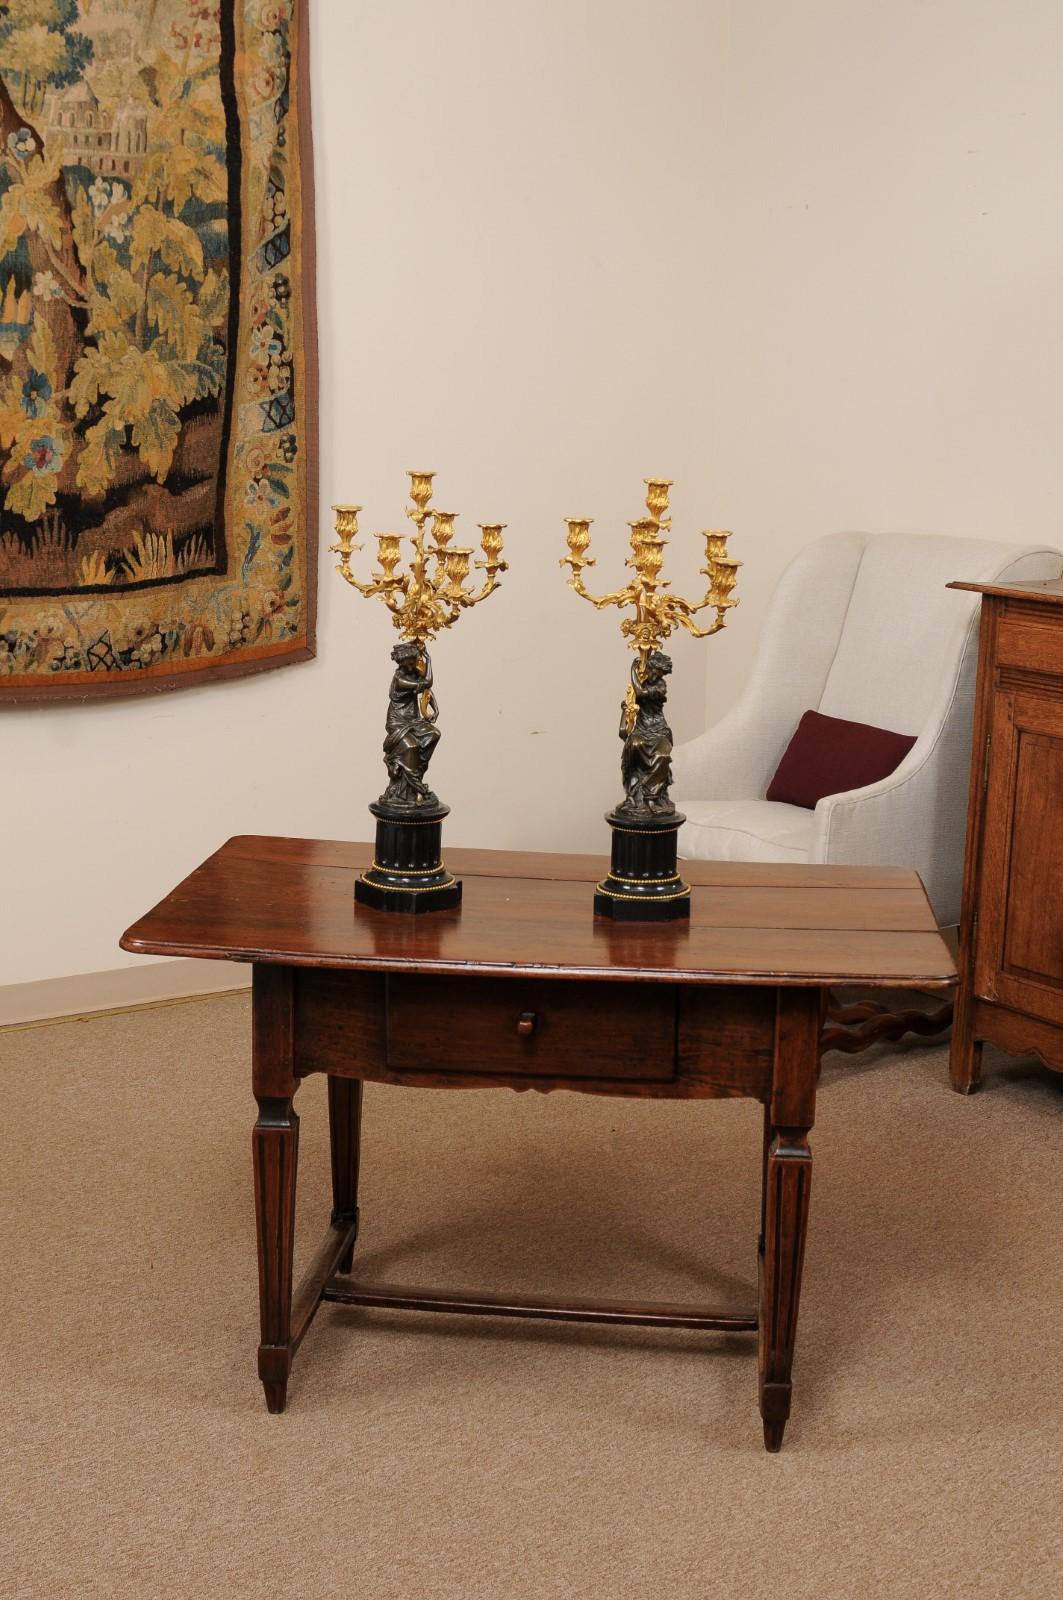 French Pair of Patinated Bronze Figured Candelara with Ormolu Arms & Onyx Bases, 19th C For Sale